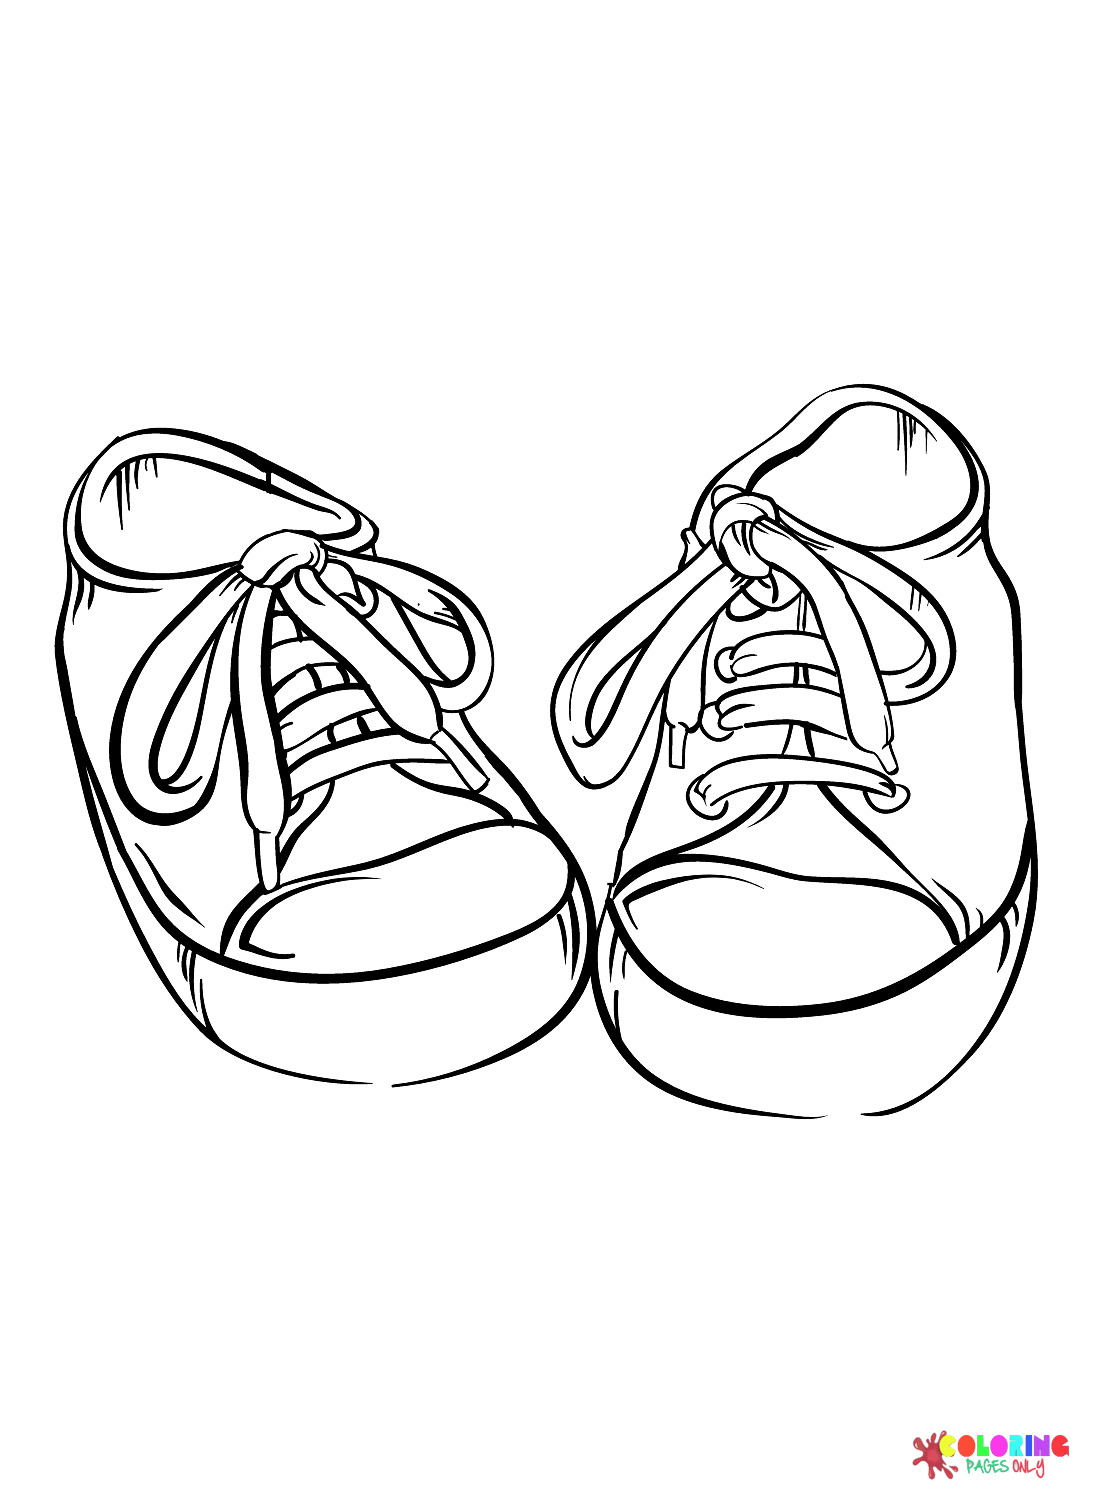 Print Sneaker Coloring Page - Free Printable Coloring Pages